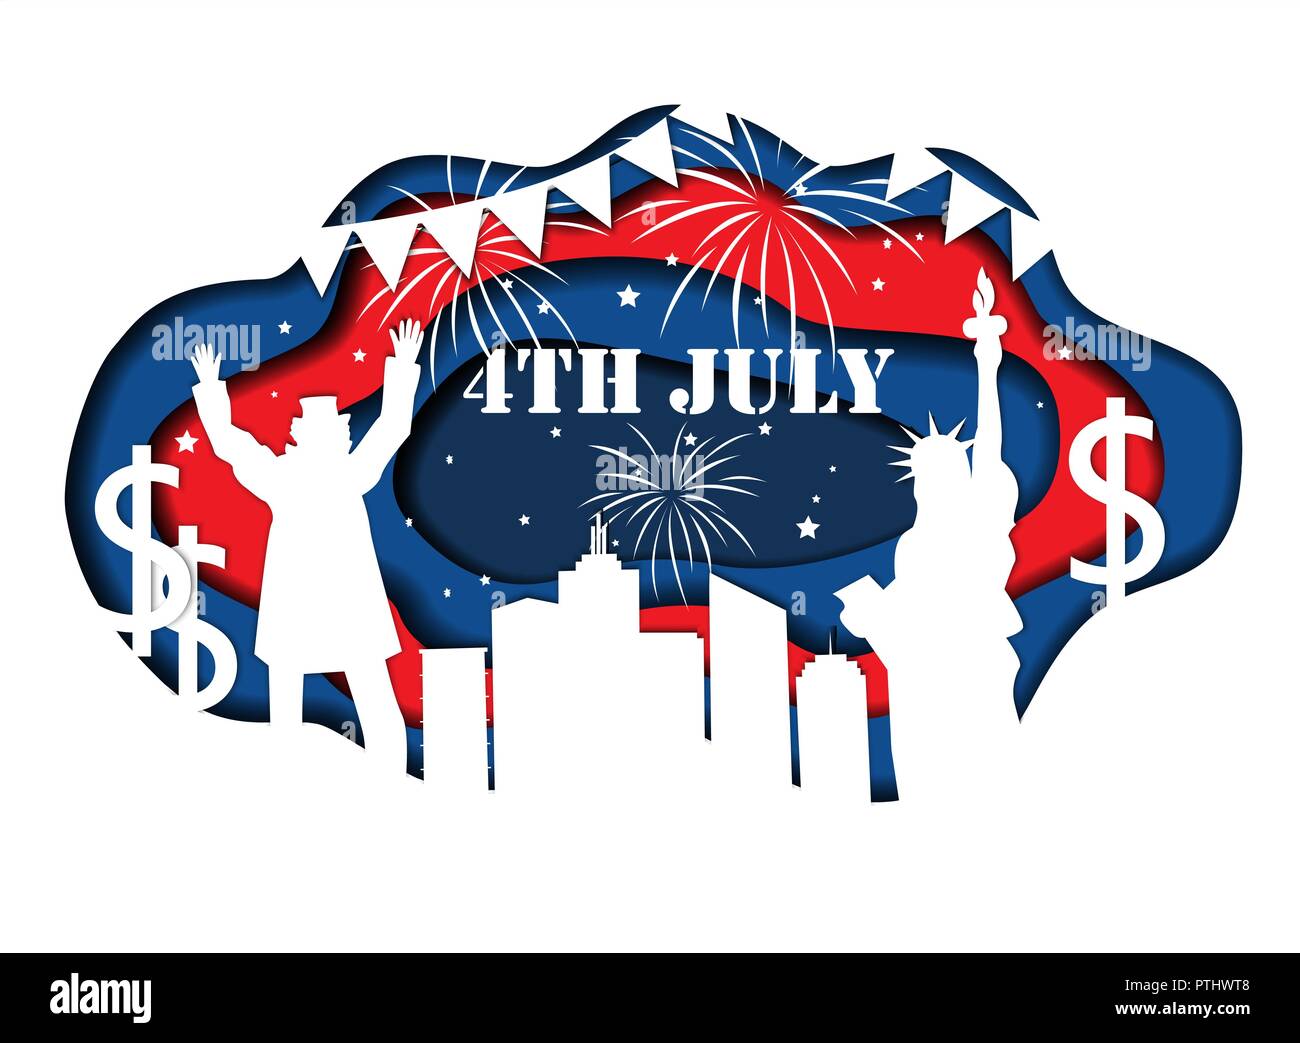 Paper cut banner for Independence Day July 4 USA with Statue of Liberty, Uncle Sam, lights, stars, and city silhouette. Vector illustration Stock Vector